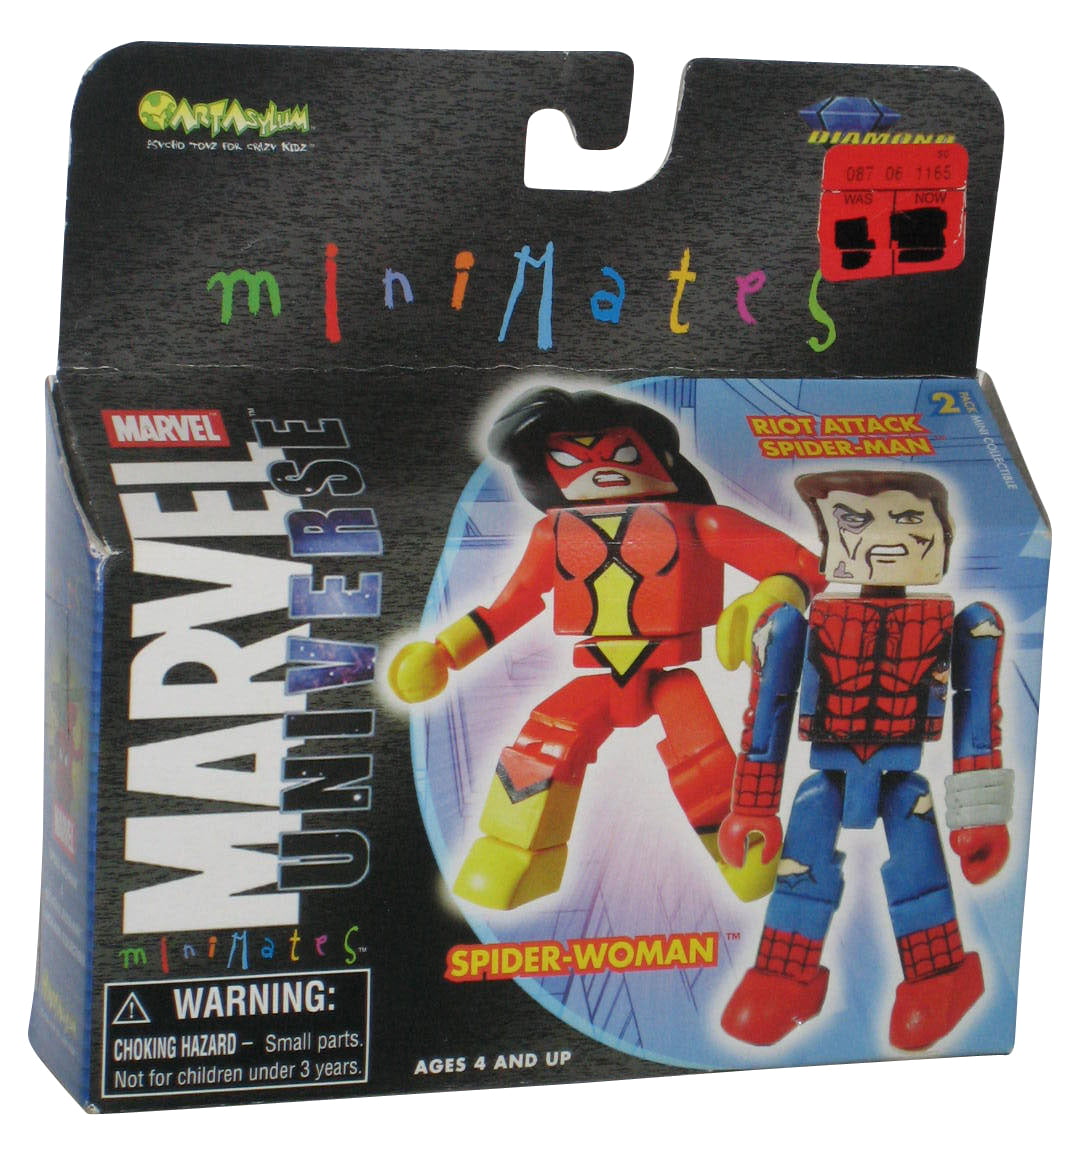 MARVEL Minimates SPIDER-WOMAN & RIOT ATTACK SPIDER-MAN Mini Collectible Toy Gift 